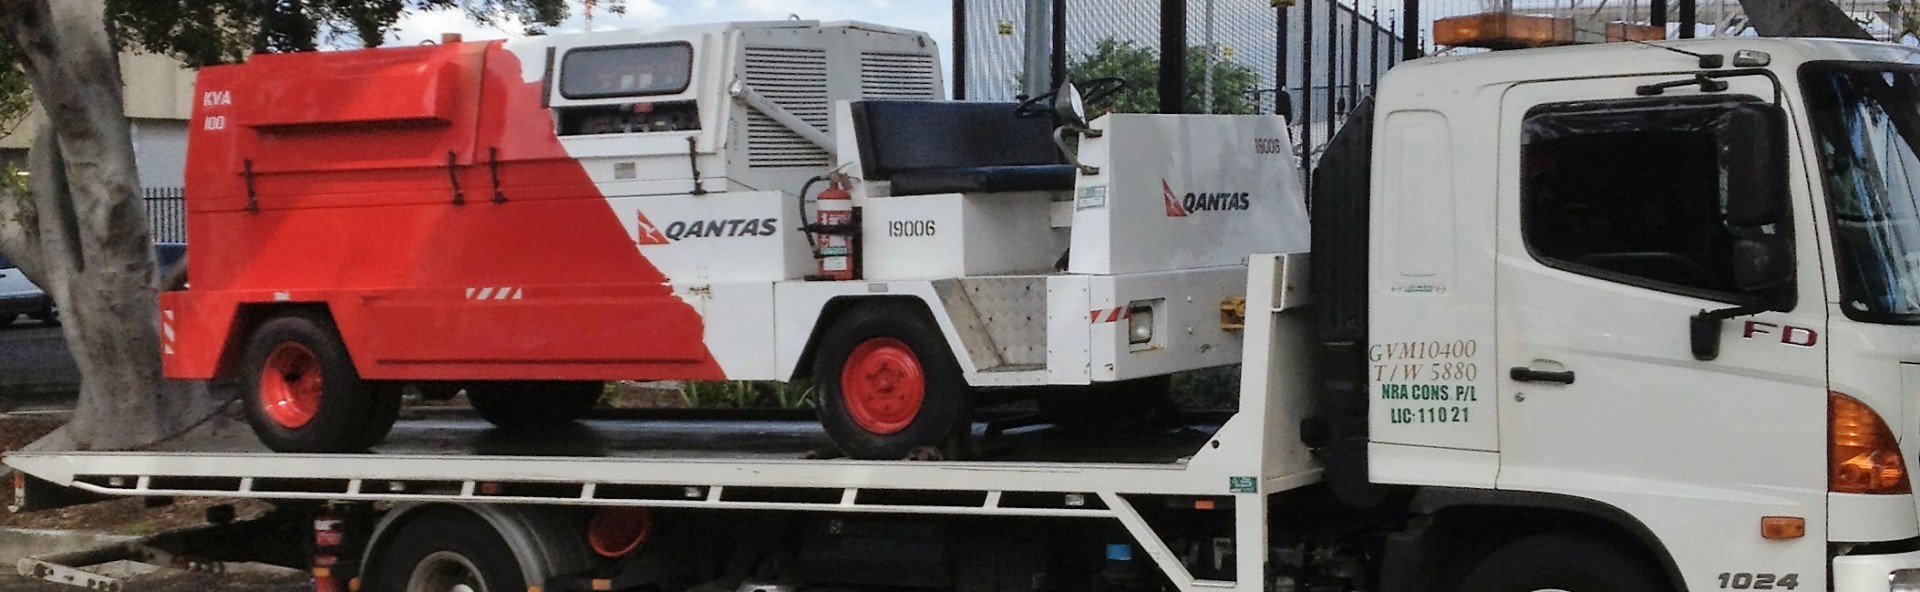 Advantages of The Selection Process For Towing Services Sydney